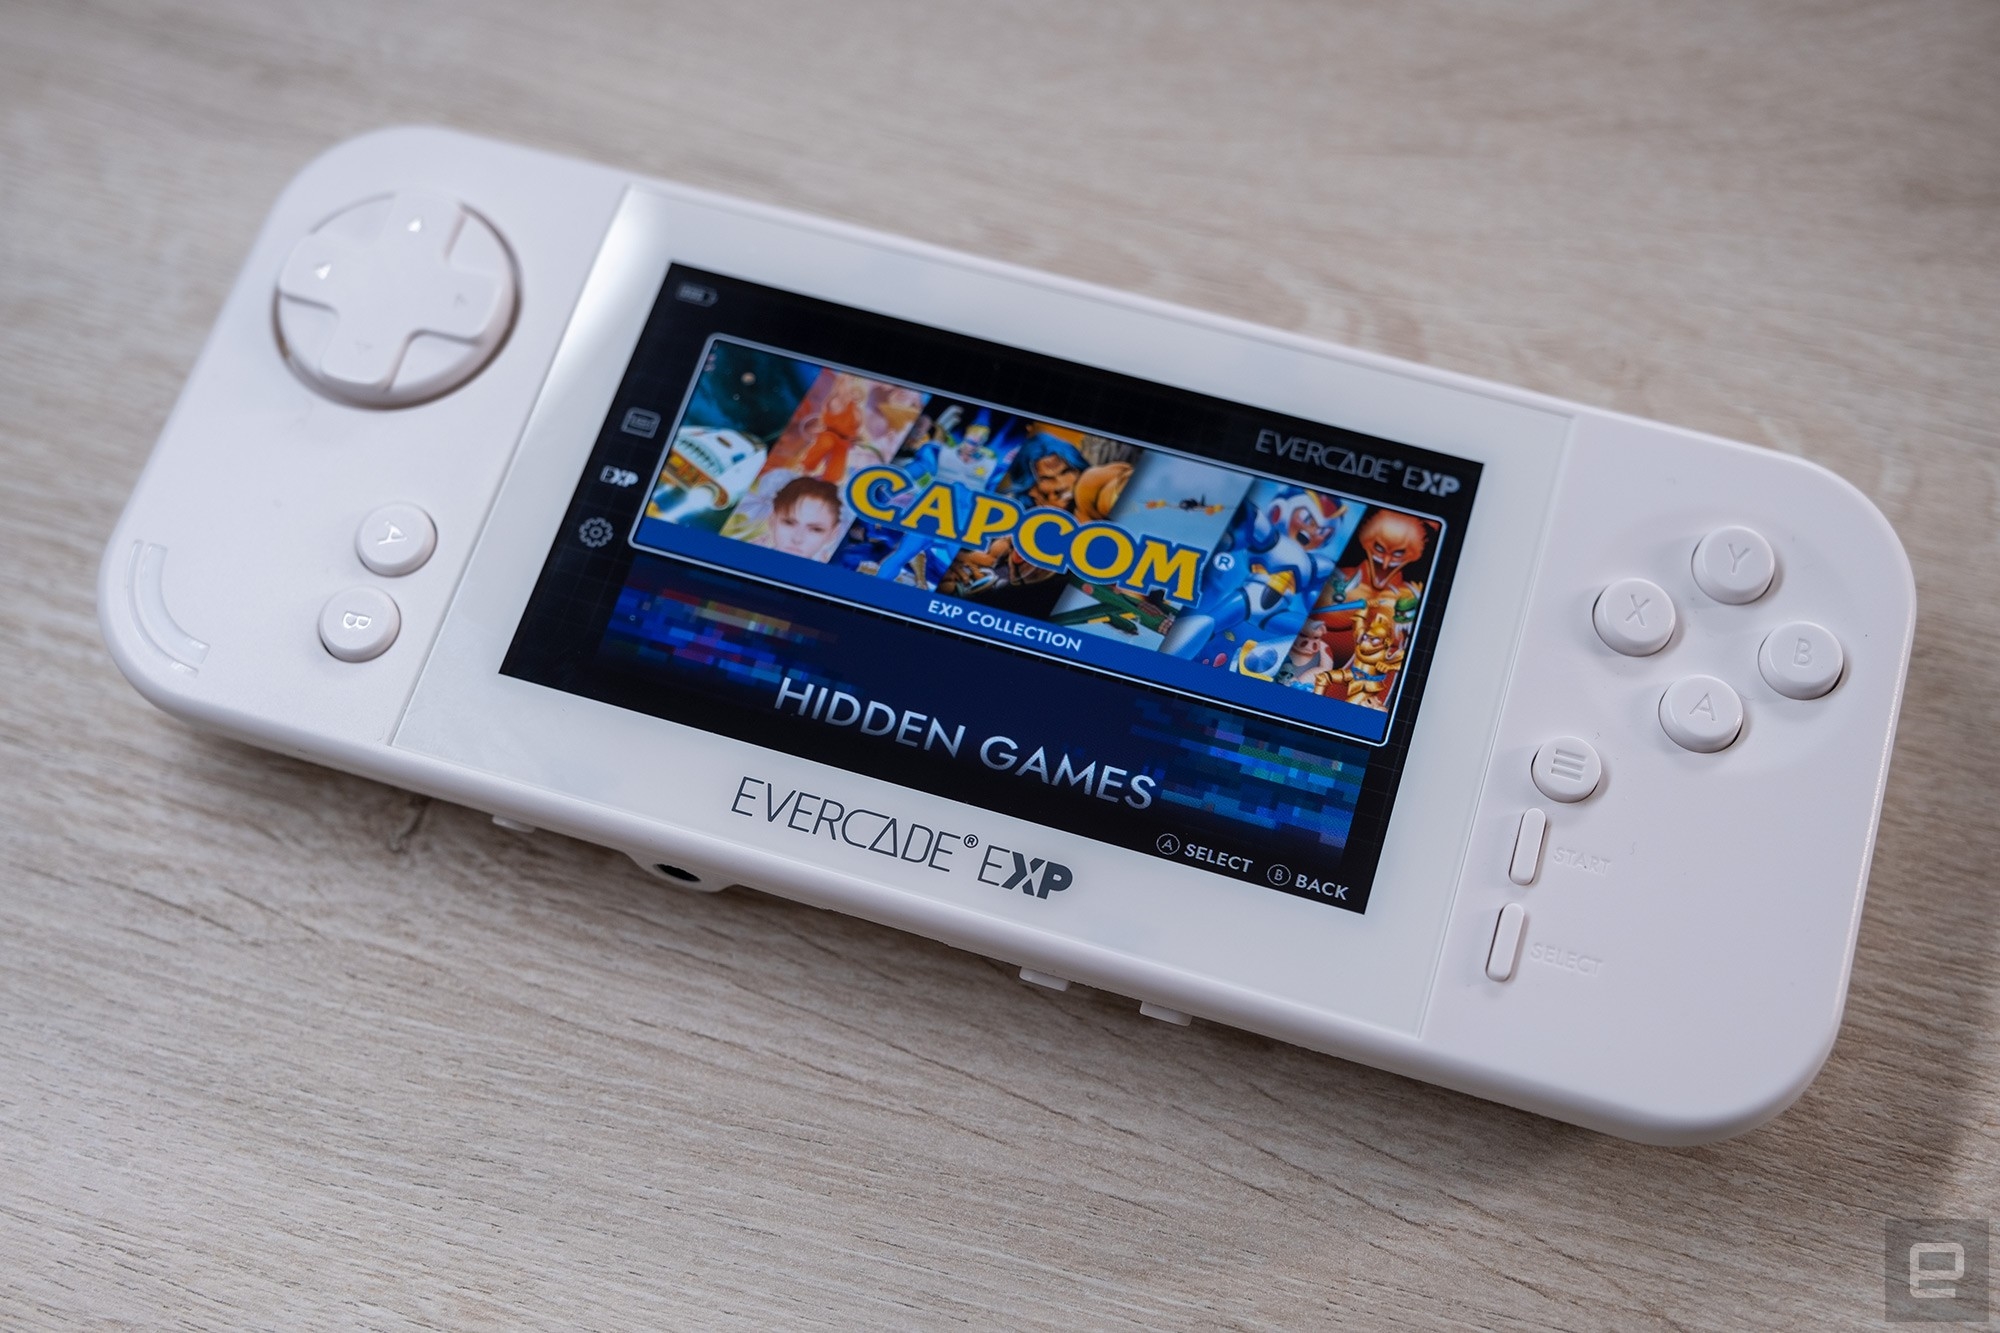 The Evercade EXP handheld brings key improvements but it's still a curious concept | DeviceDaily.com